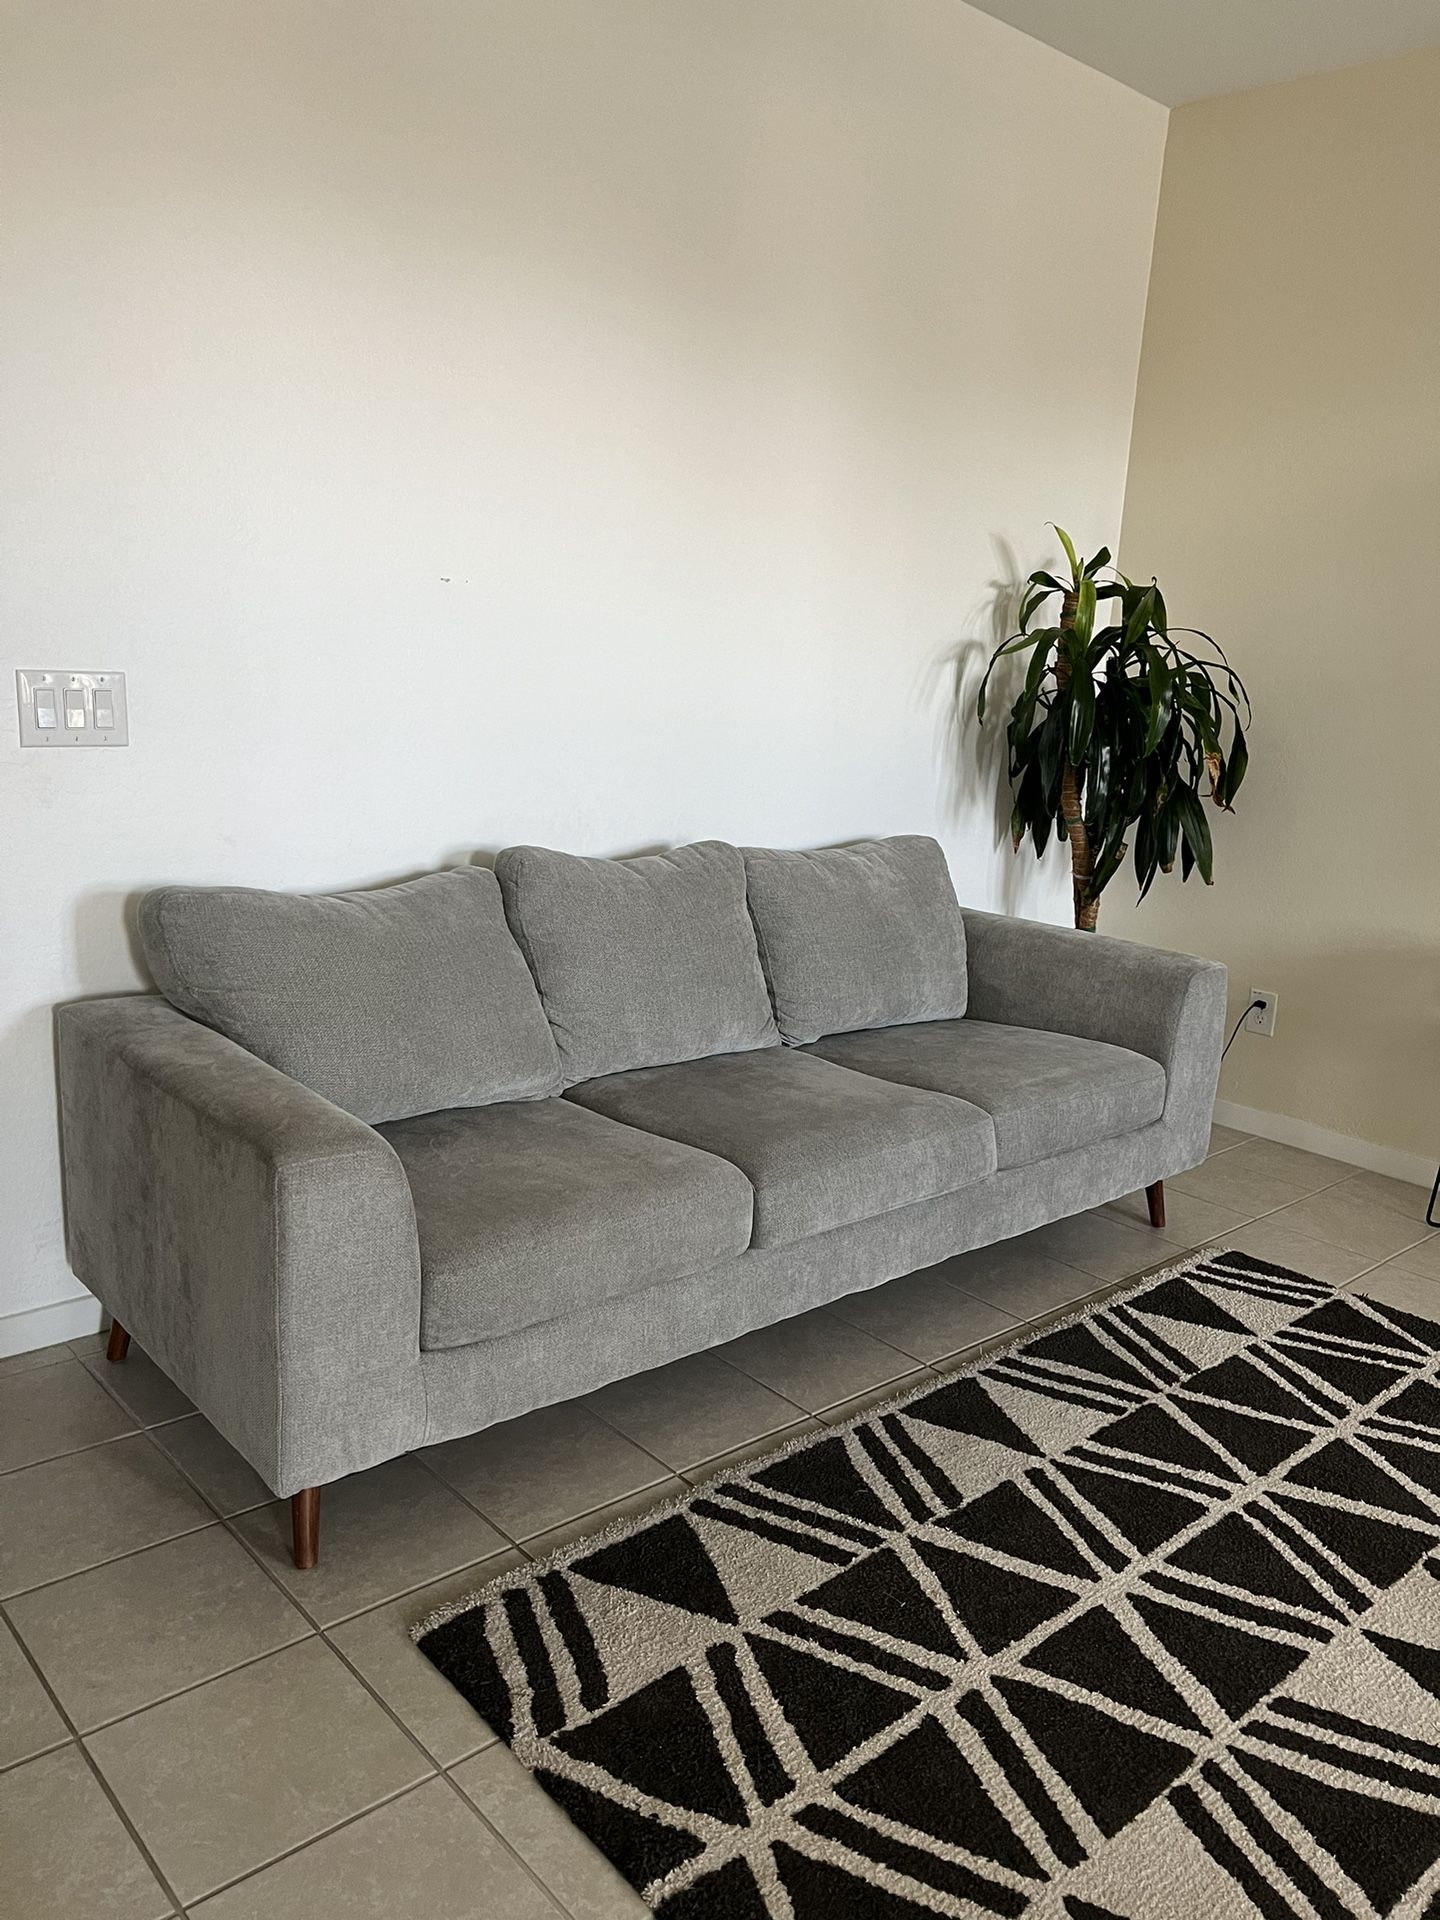 Two Couches For Sale